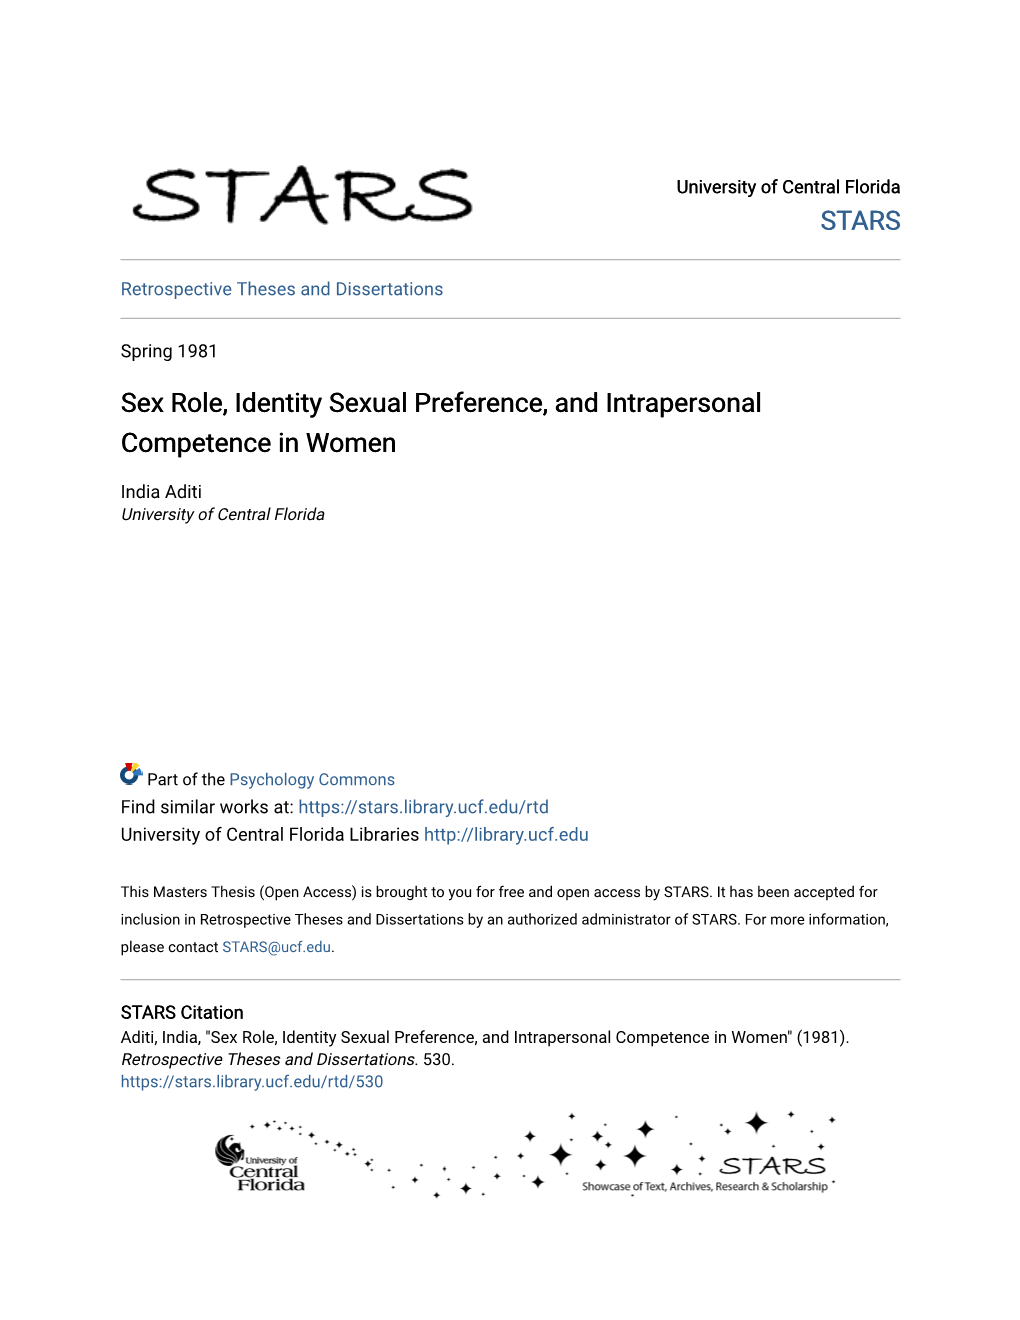 Sex Role, Identity Sexual Preference, and Intrapersonal Competence in Women